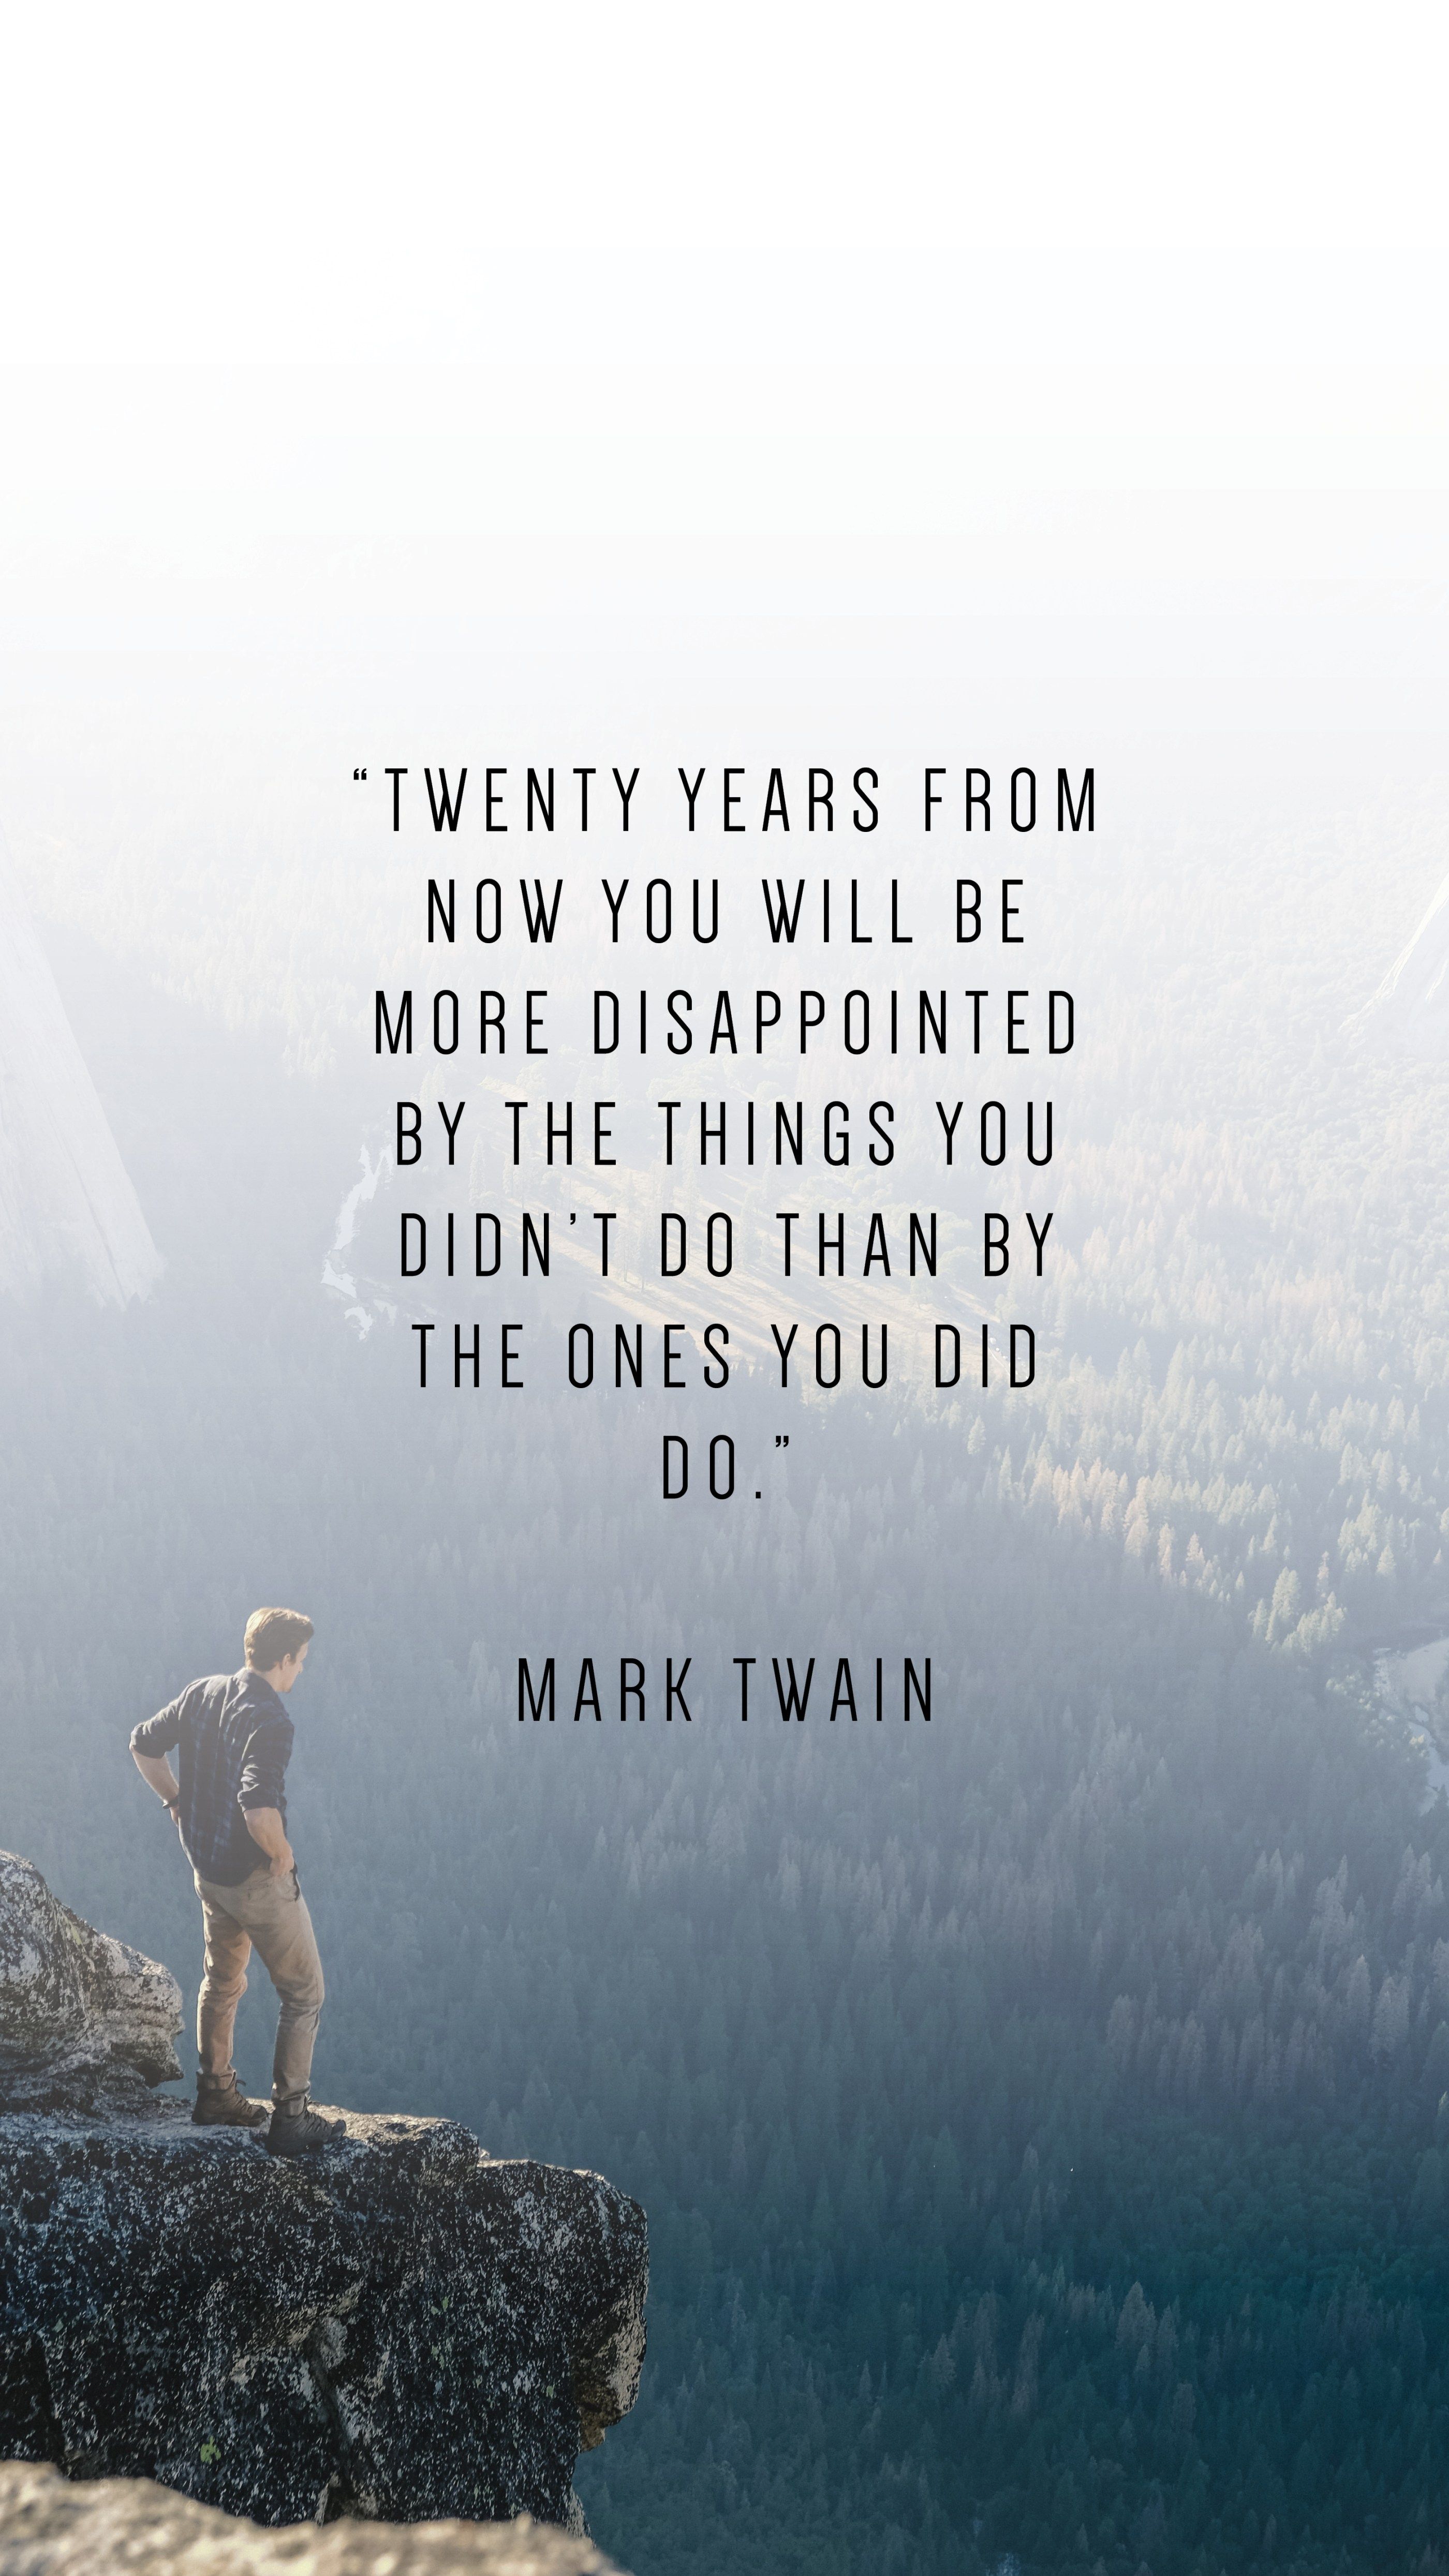 Phone Wallpaper To Inspire - Mark twain quotes, Chance